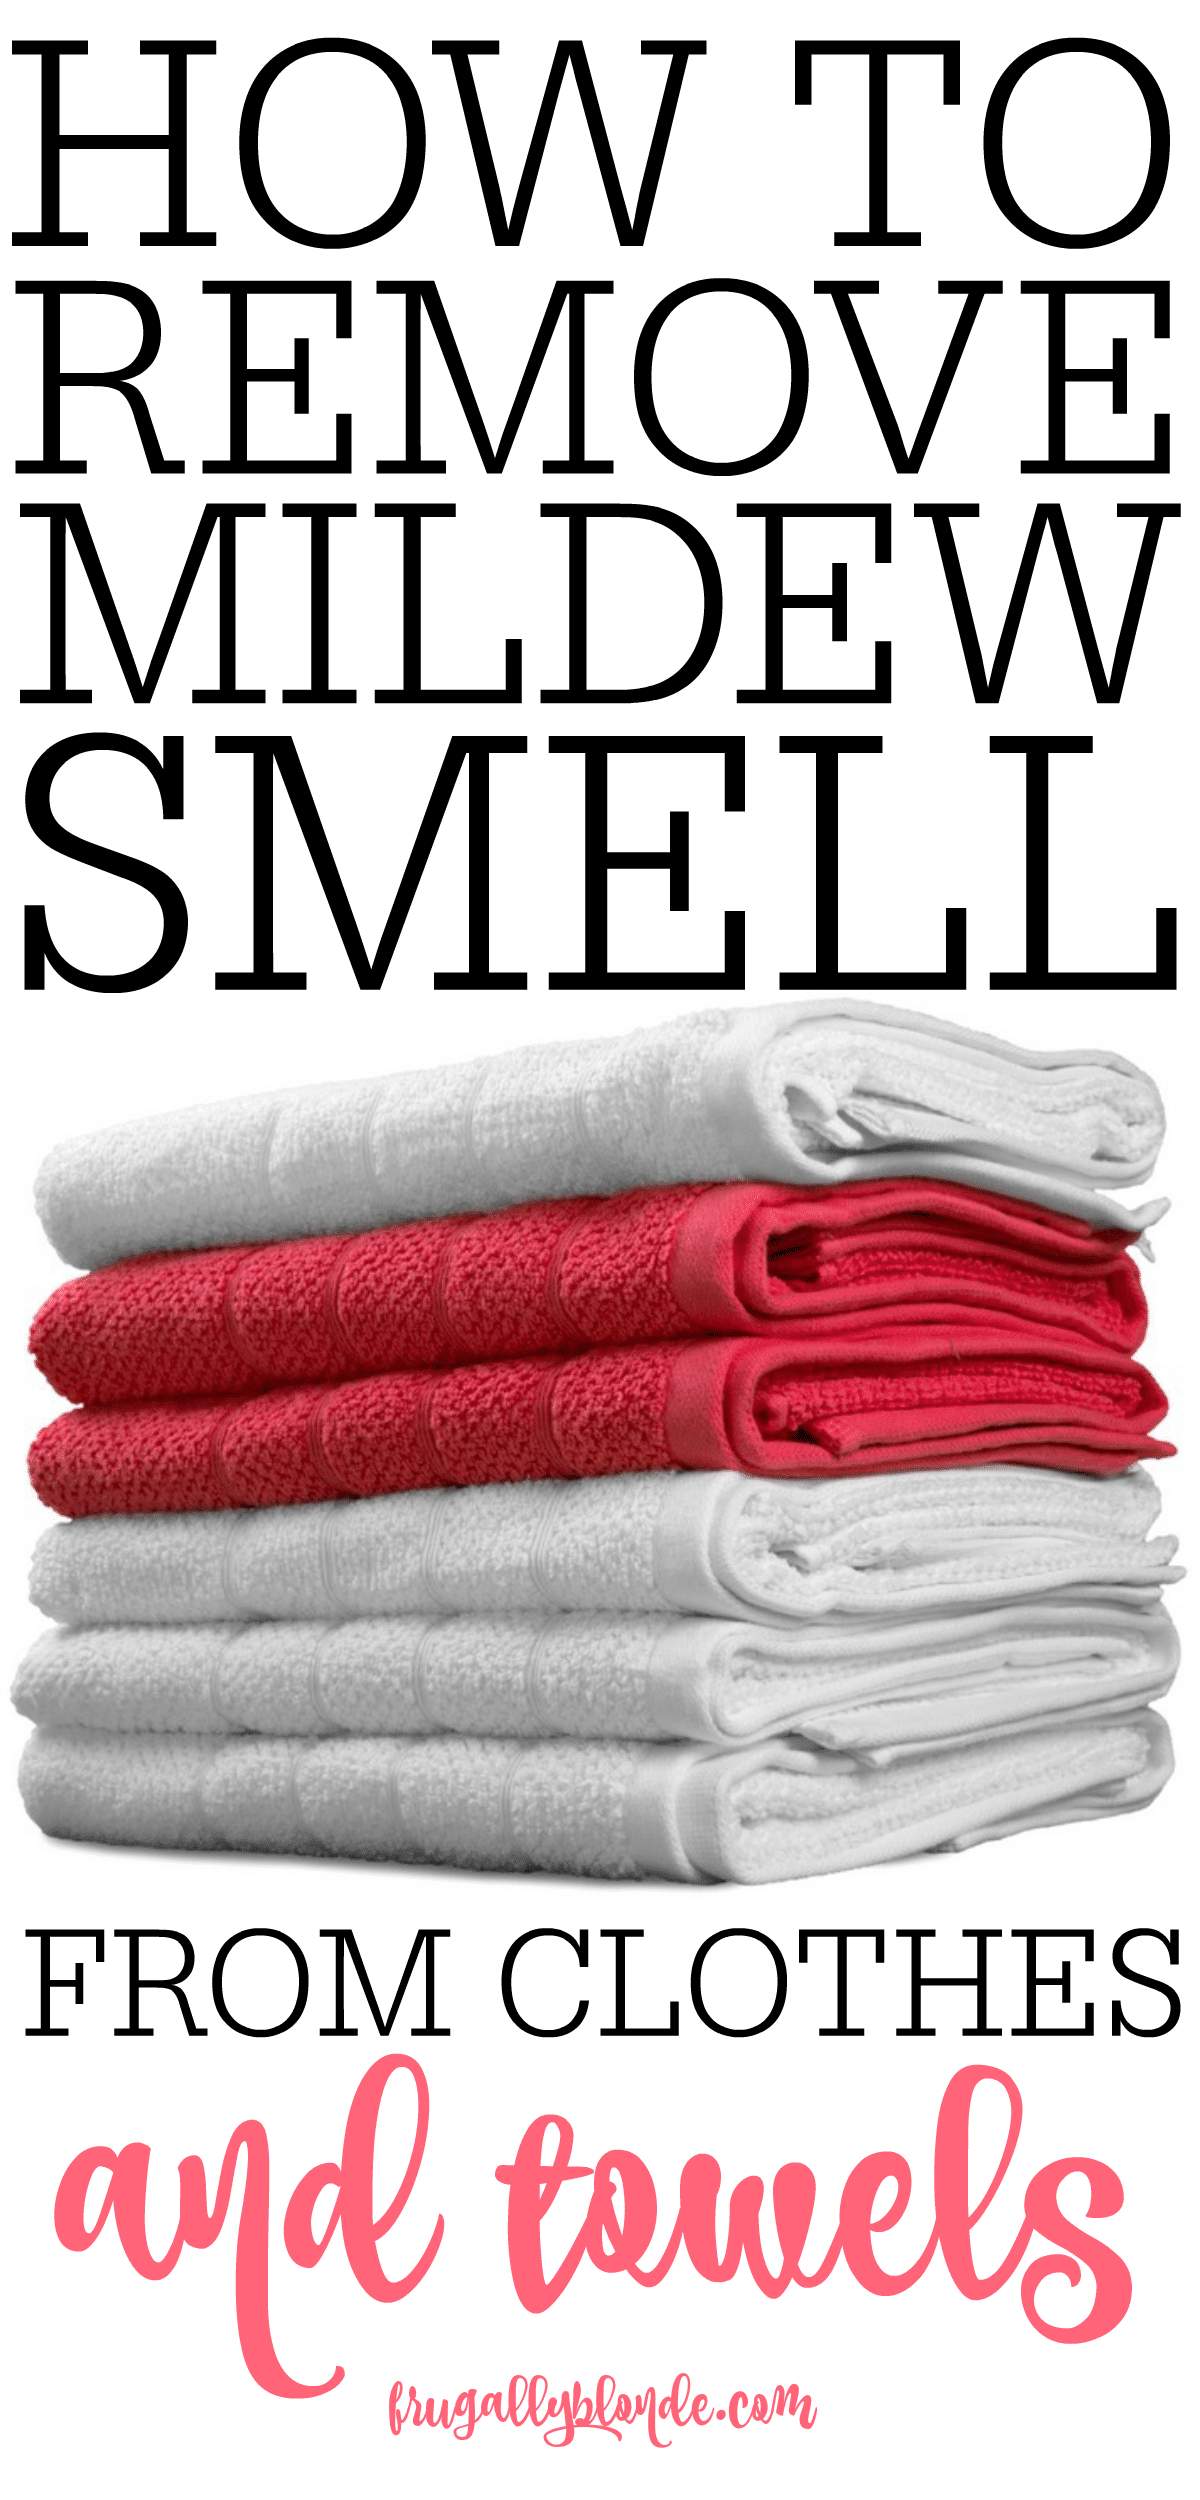 How To Remove Mildew Smell From Clothes and Towels - Frugally Blonde